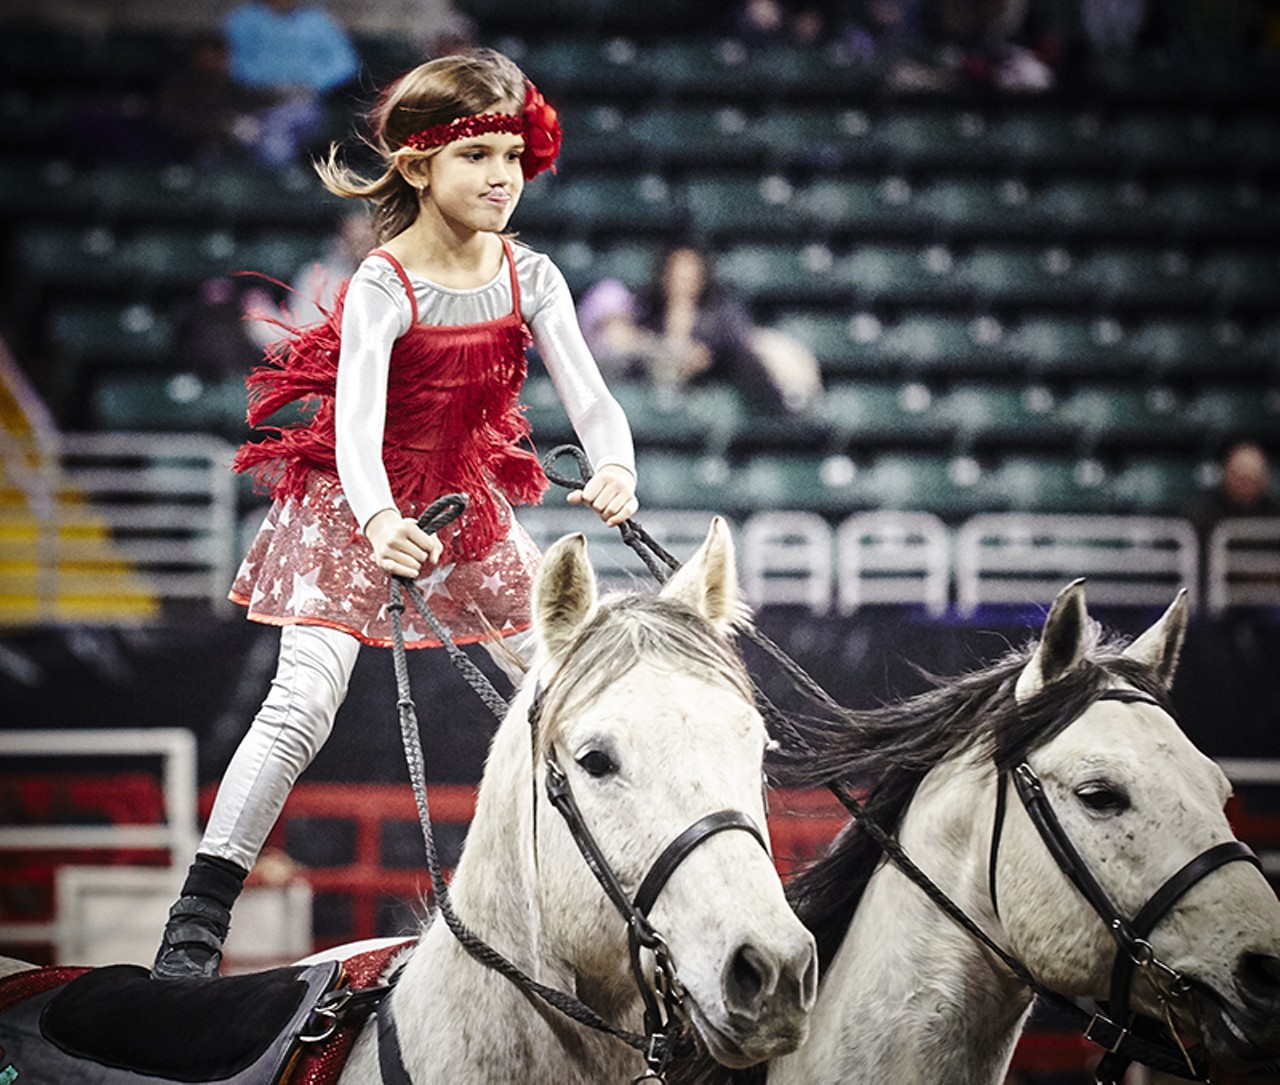 Horsin' Around at the Lone Star Rodeo at Family Arena